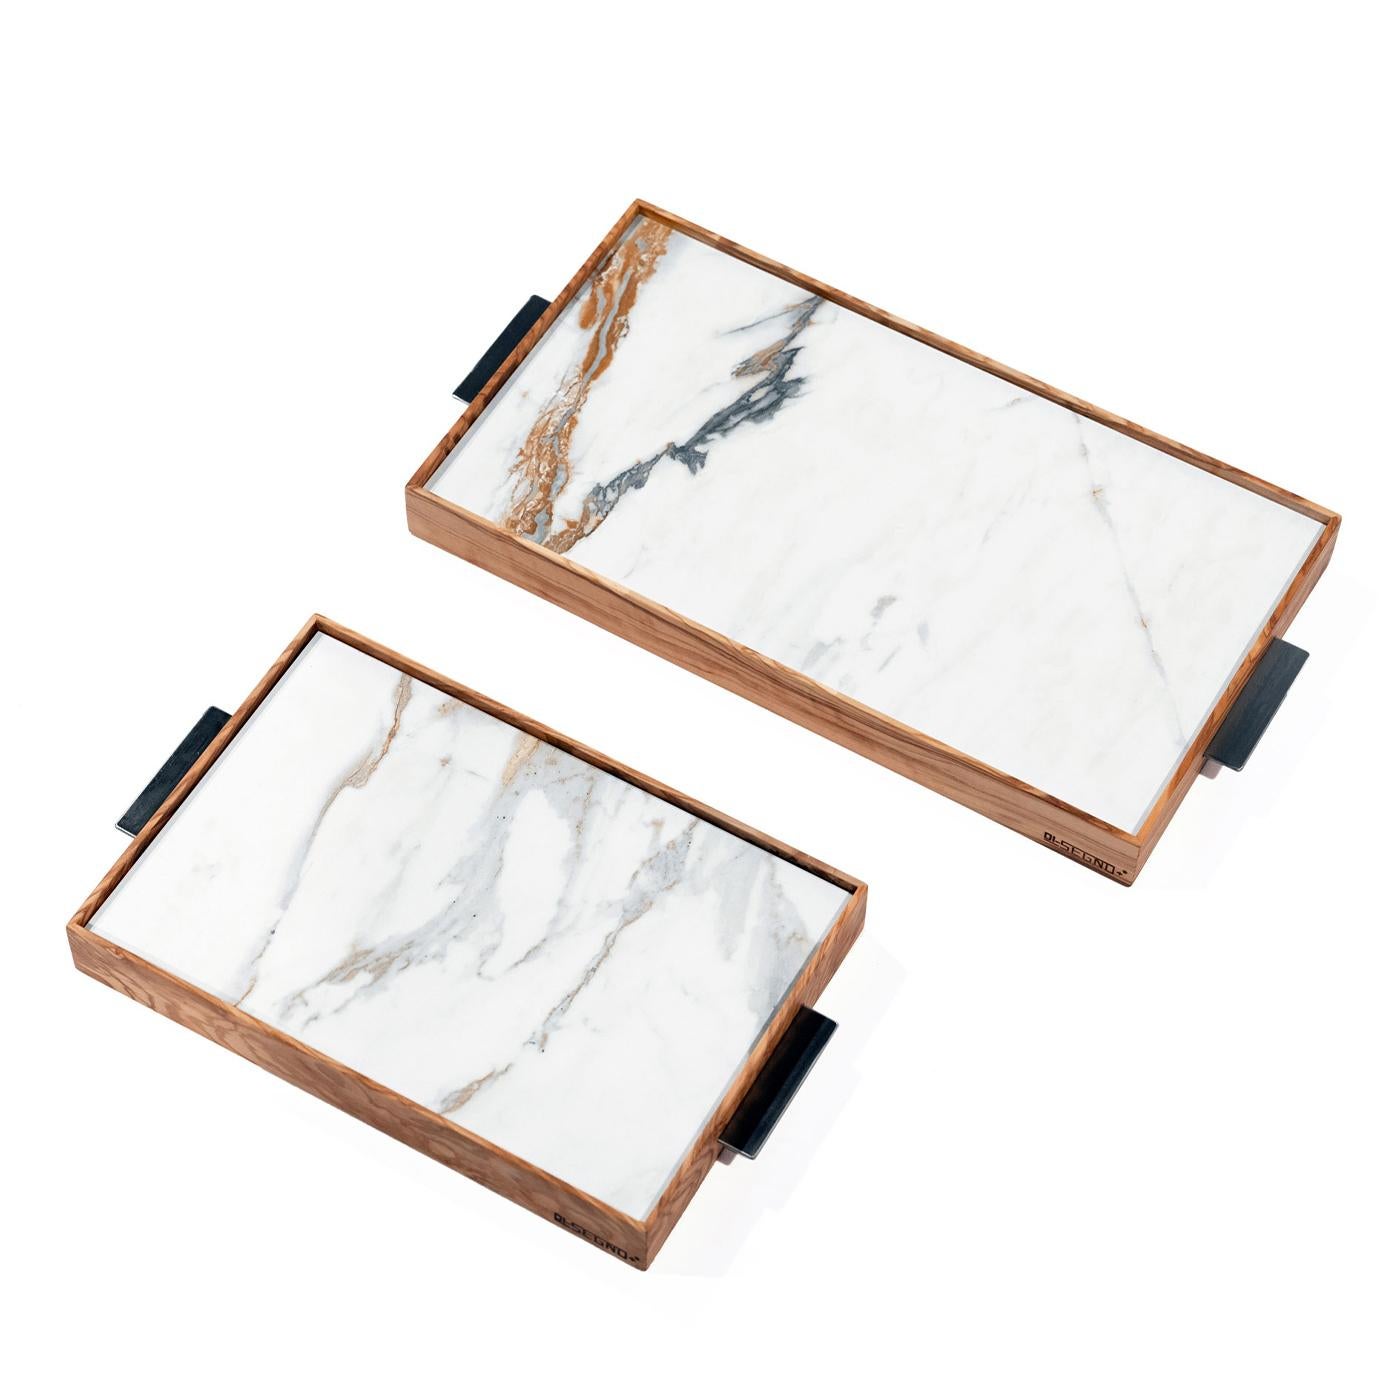 A fusion of design and functionality, this tray by Disegnopiù boasts a refined surface of Gress Reverie. The varying veins ranging from light grey to cream, rich terracotta hues, and delicate ink-blue shades create a distinctive visual landscape